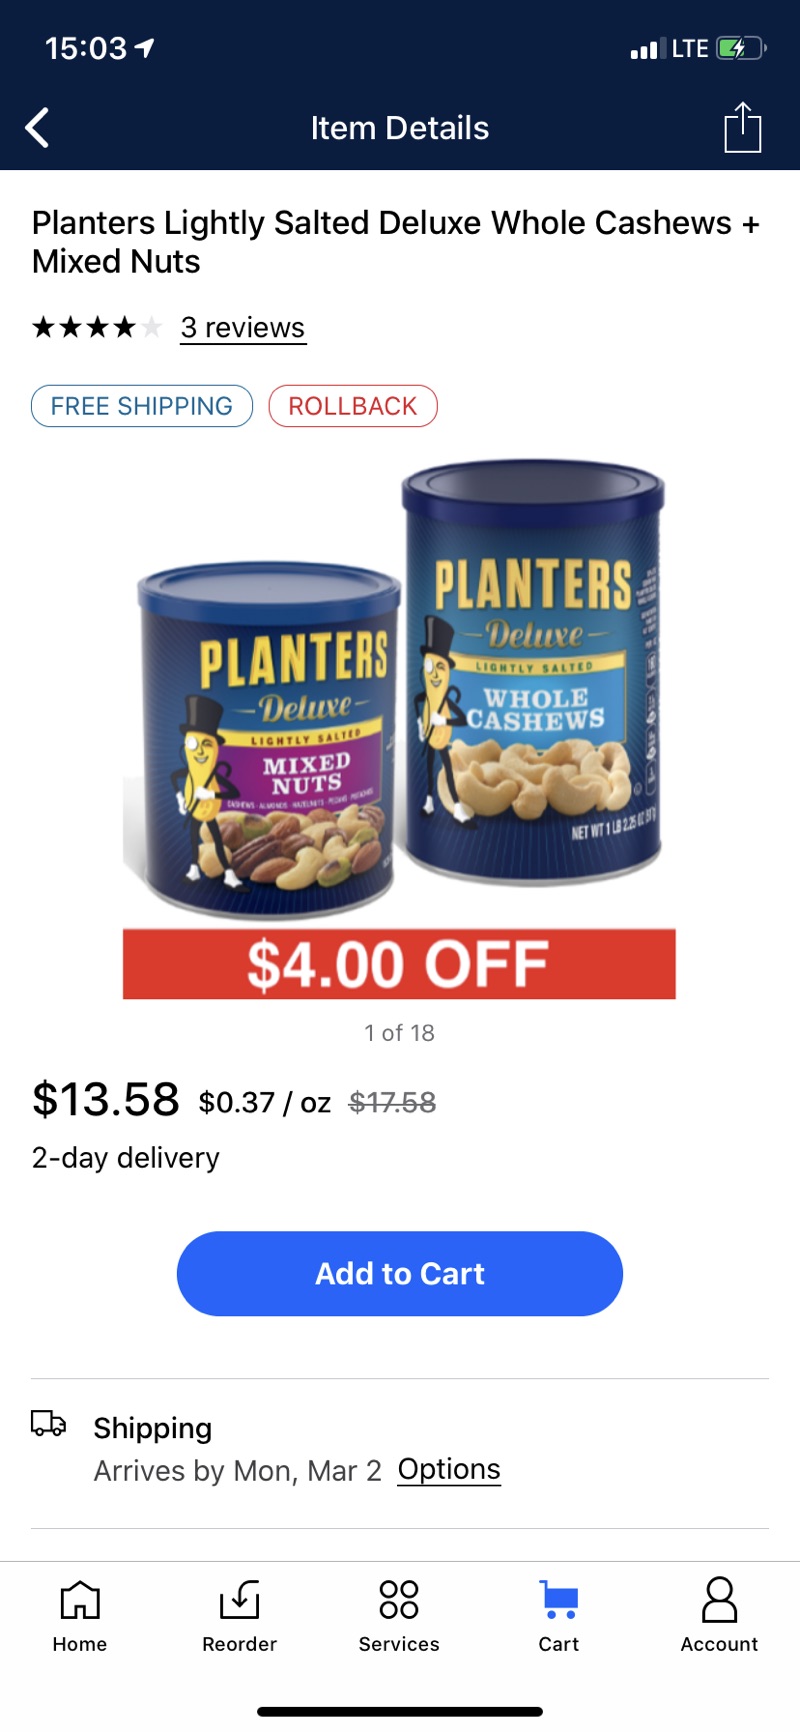 Planters Lightly Salted Deluxe Whole Cashews + Mixed Nuts - Walmart.com 混合坚果和腰果